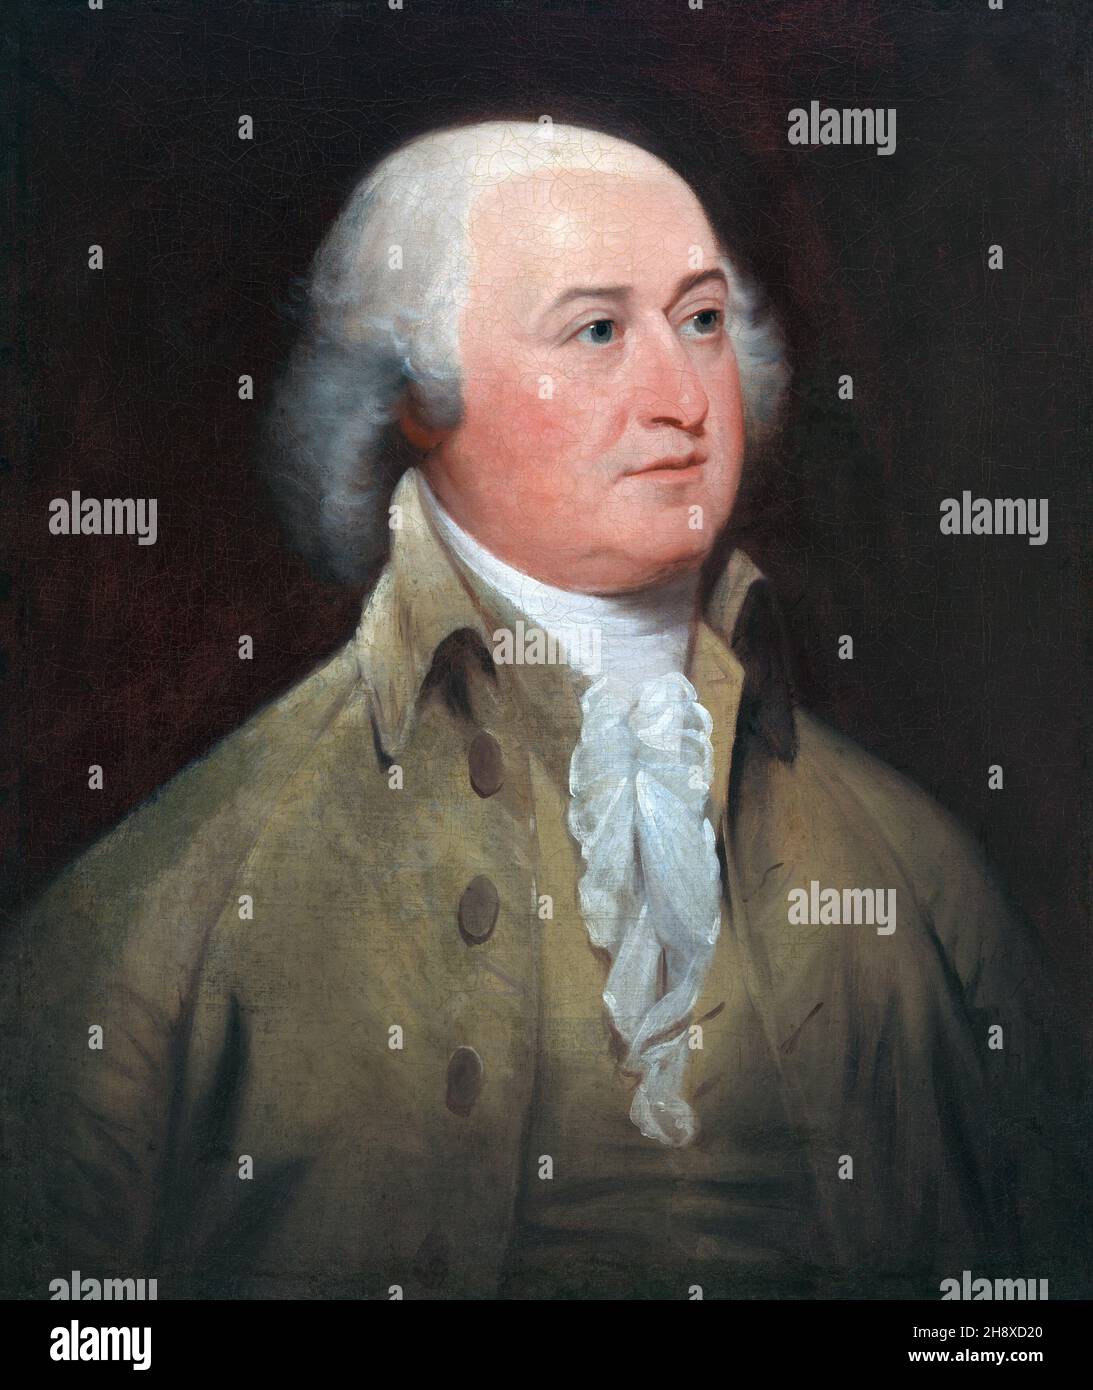 John Adams (1735-1826), 1st Vice President and 2nd President of the United States, American Founding Father, oil on canvas painting by John Trumbull from an original painting by Gilbert Stuart, 1793 Stock Photo